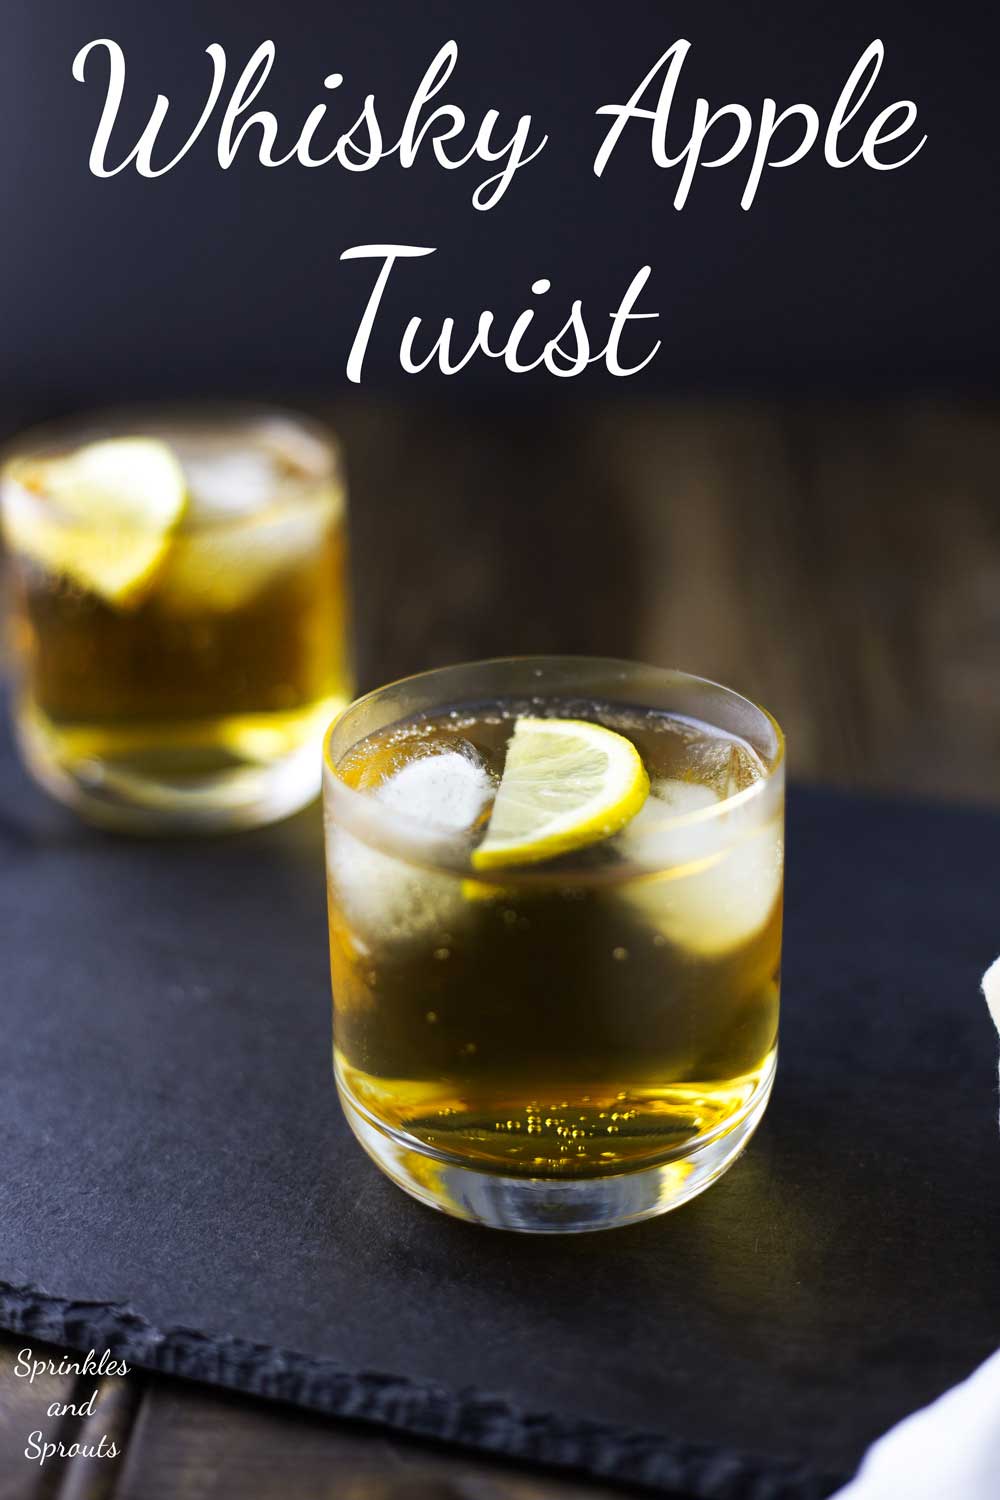 Whisky Apple Twist. This delicious whisky cocktail is seriously quaffable and perfect for serving to friends.